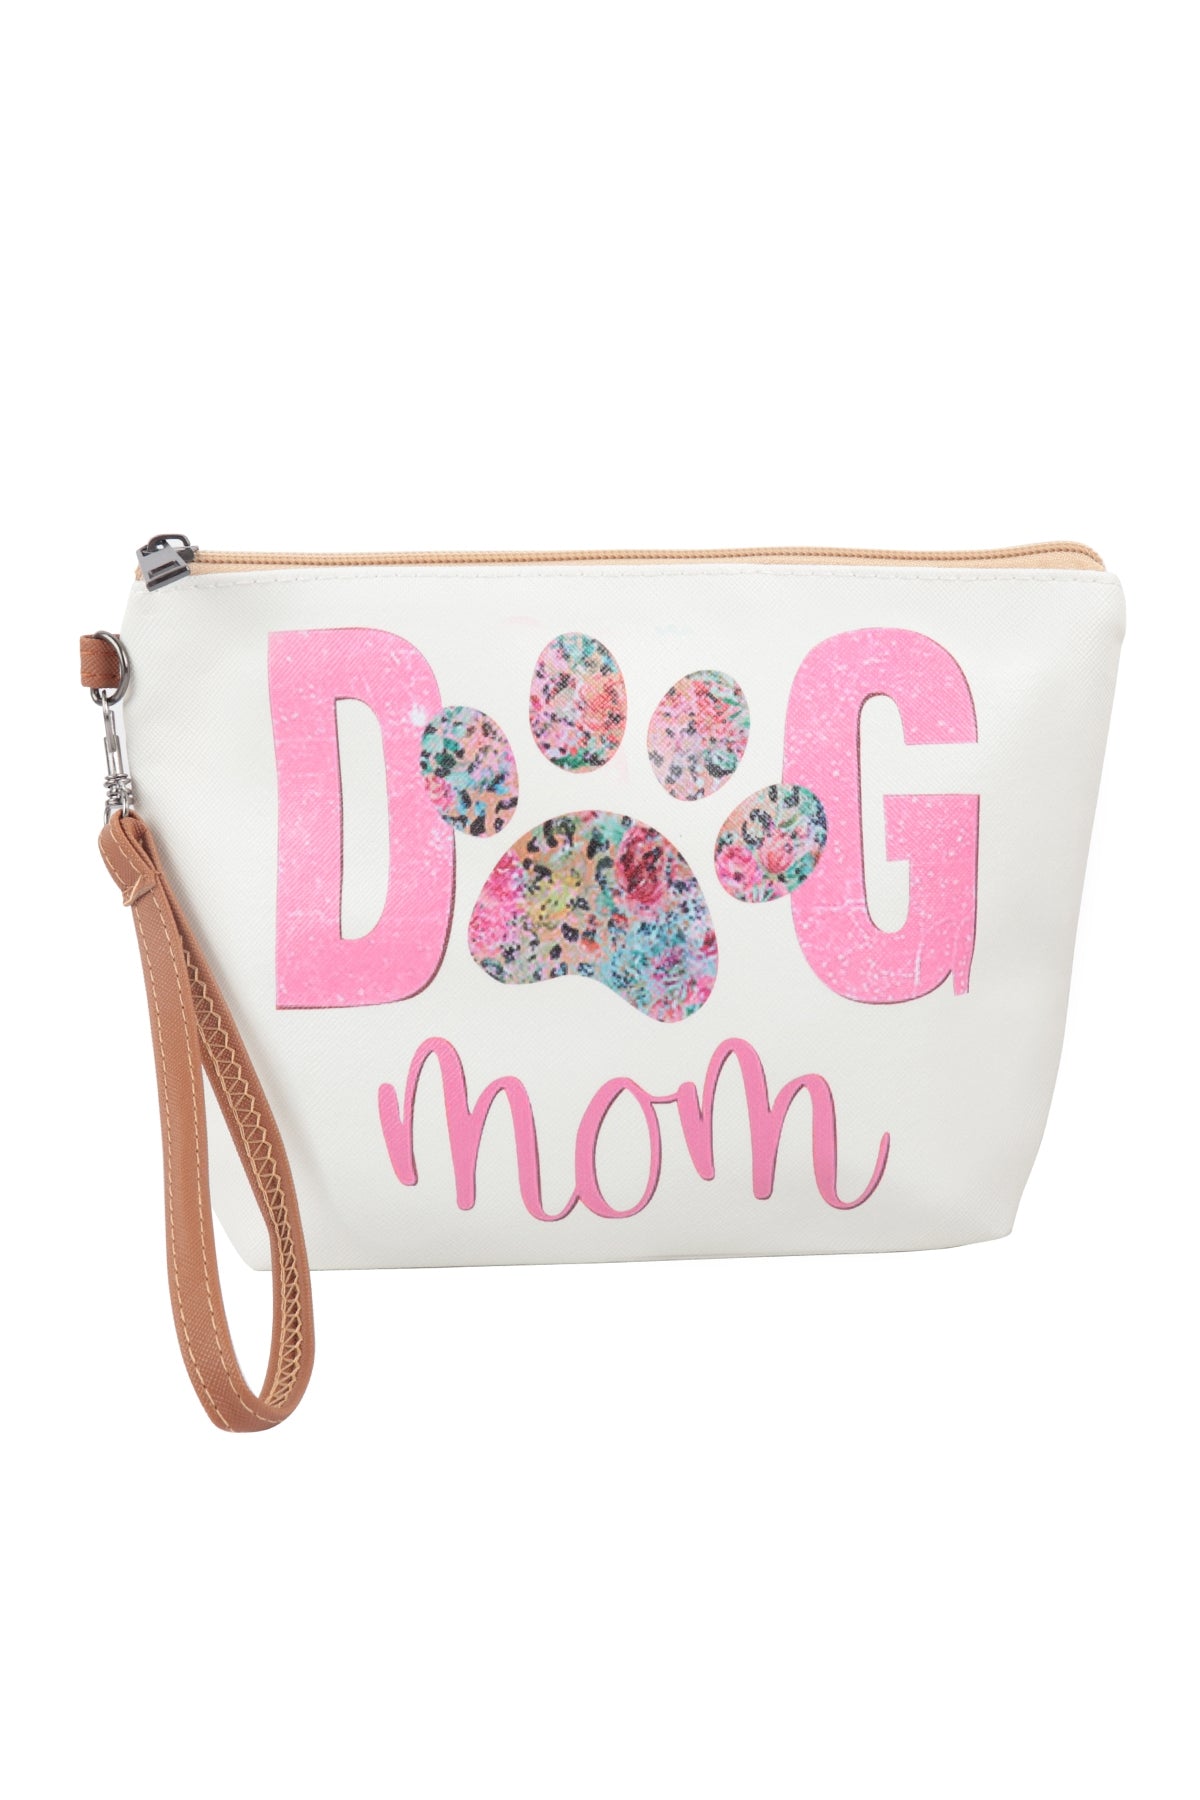 Dog Mom cosmetic case with wristlet